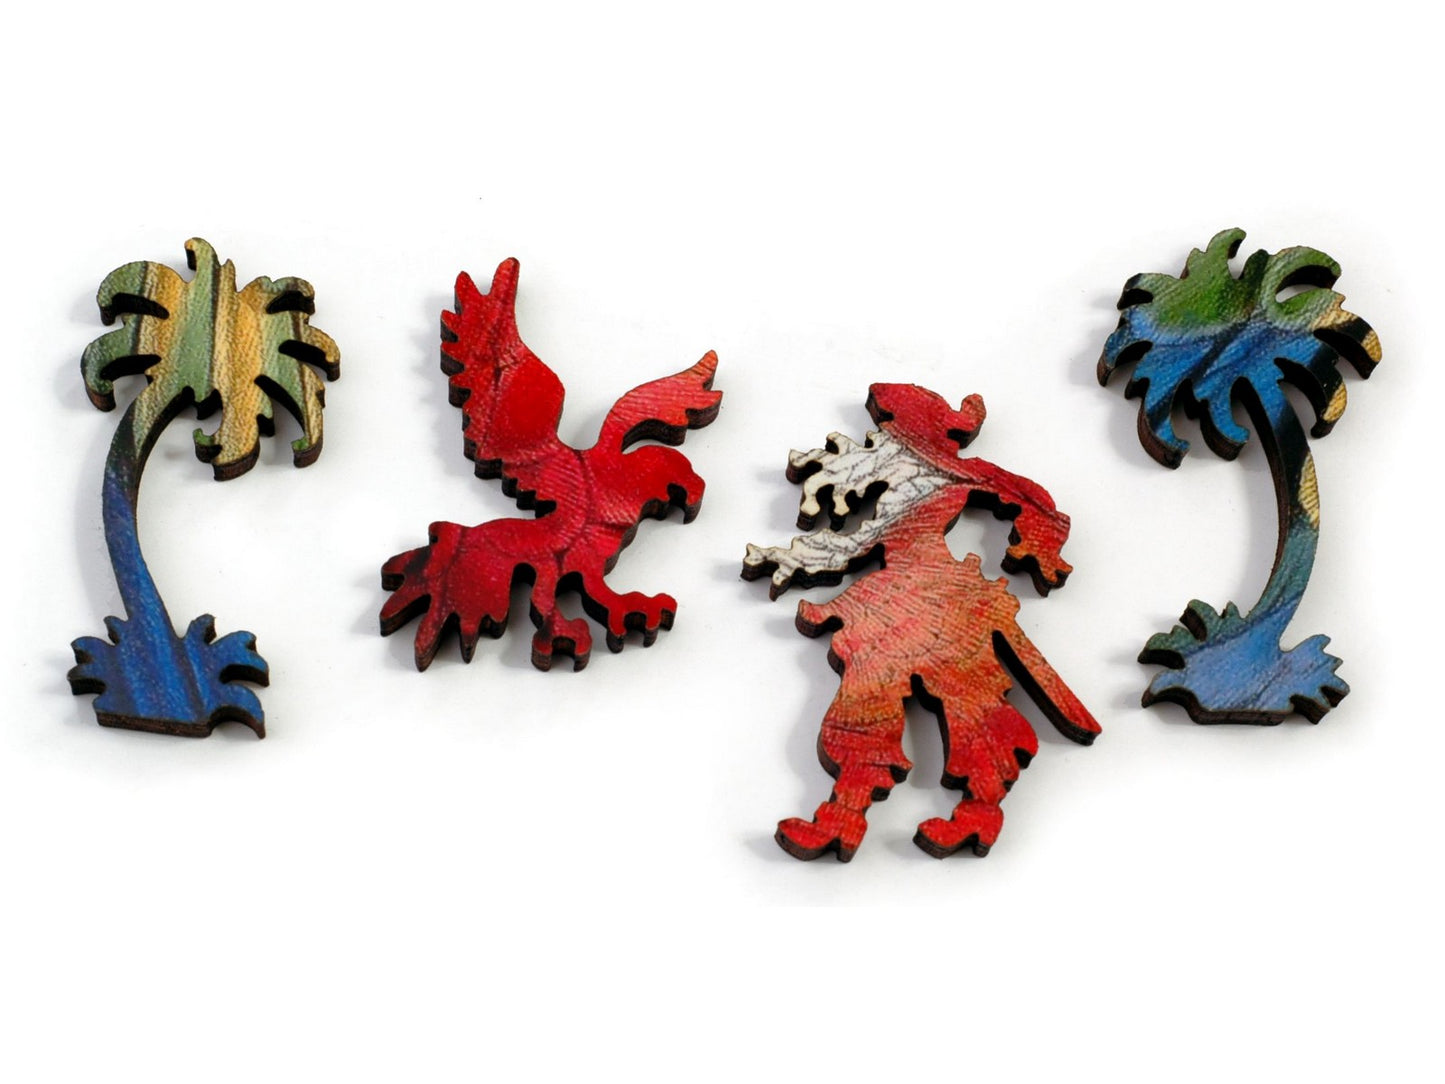 A closeup of pieces, in the shapes of a pirate, a parrot, and two palm trees.